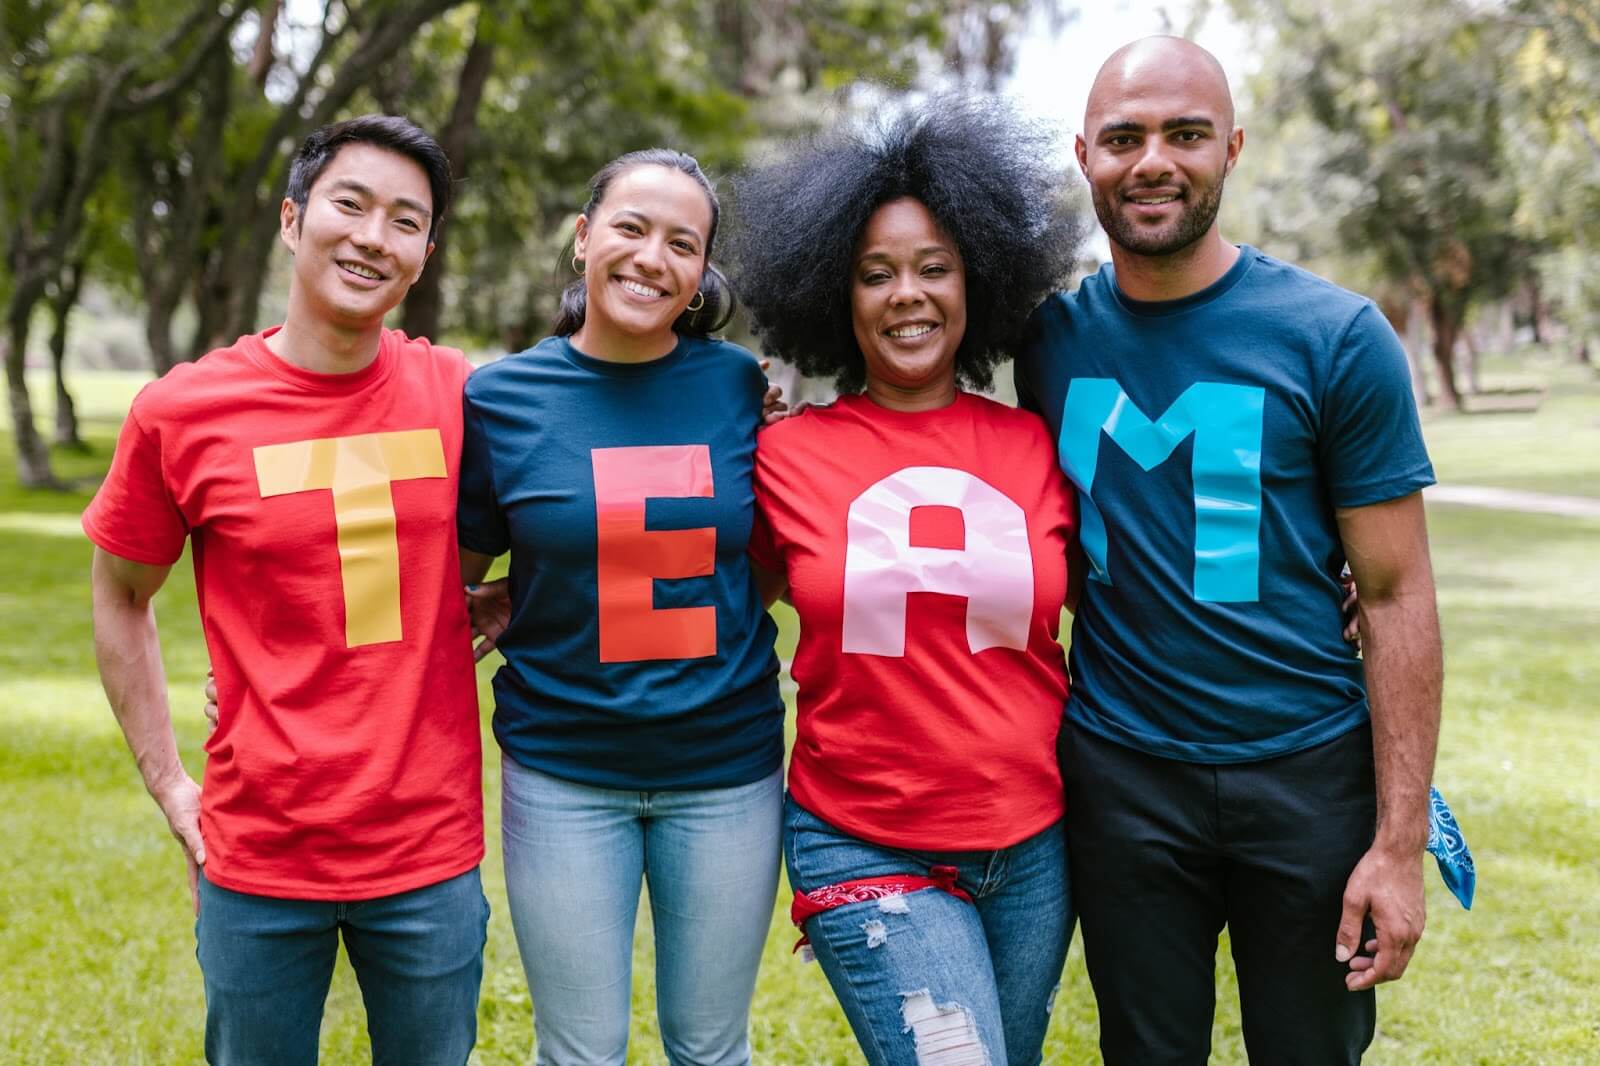 Group of people wearing t-shirts that spell the word 'team'